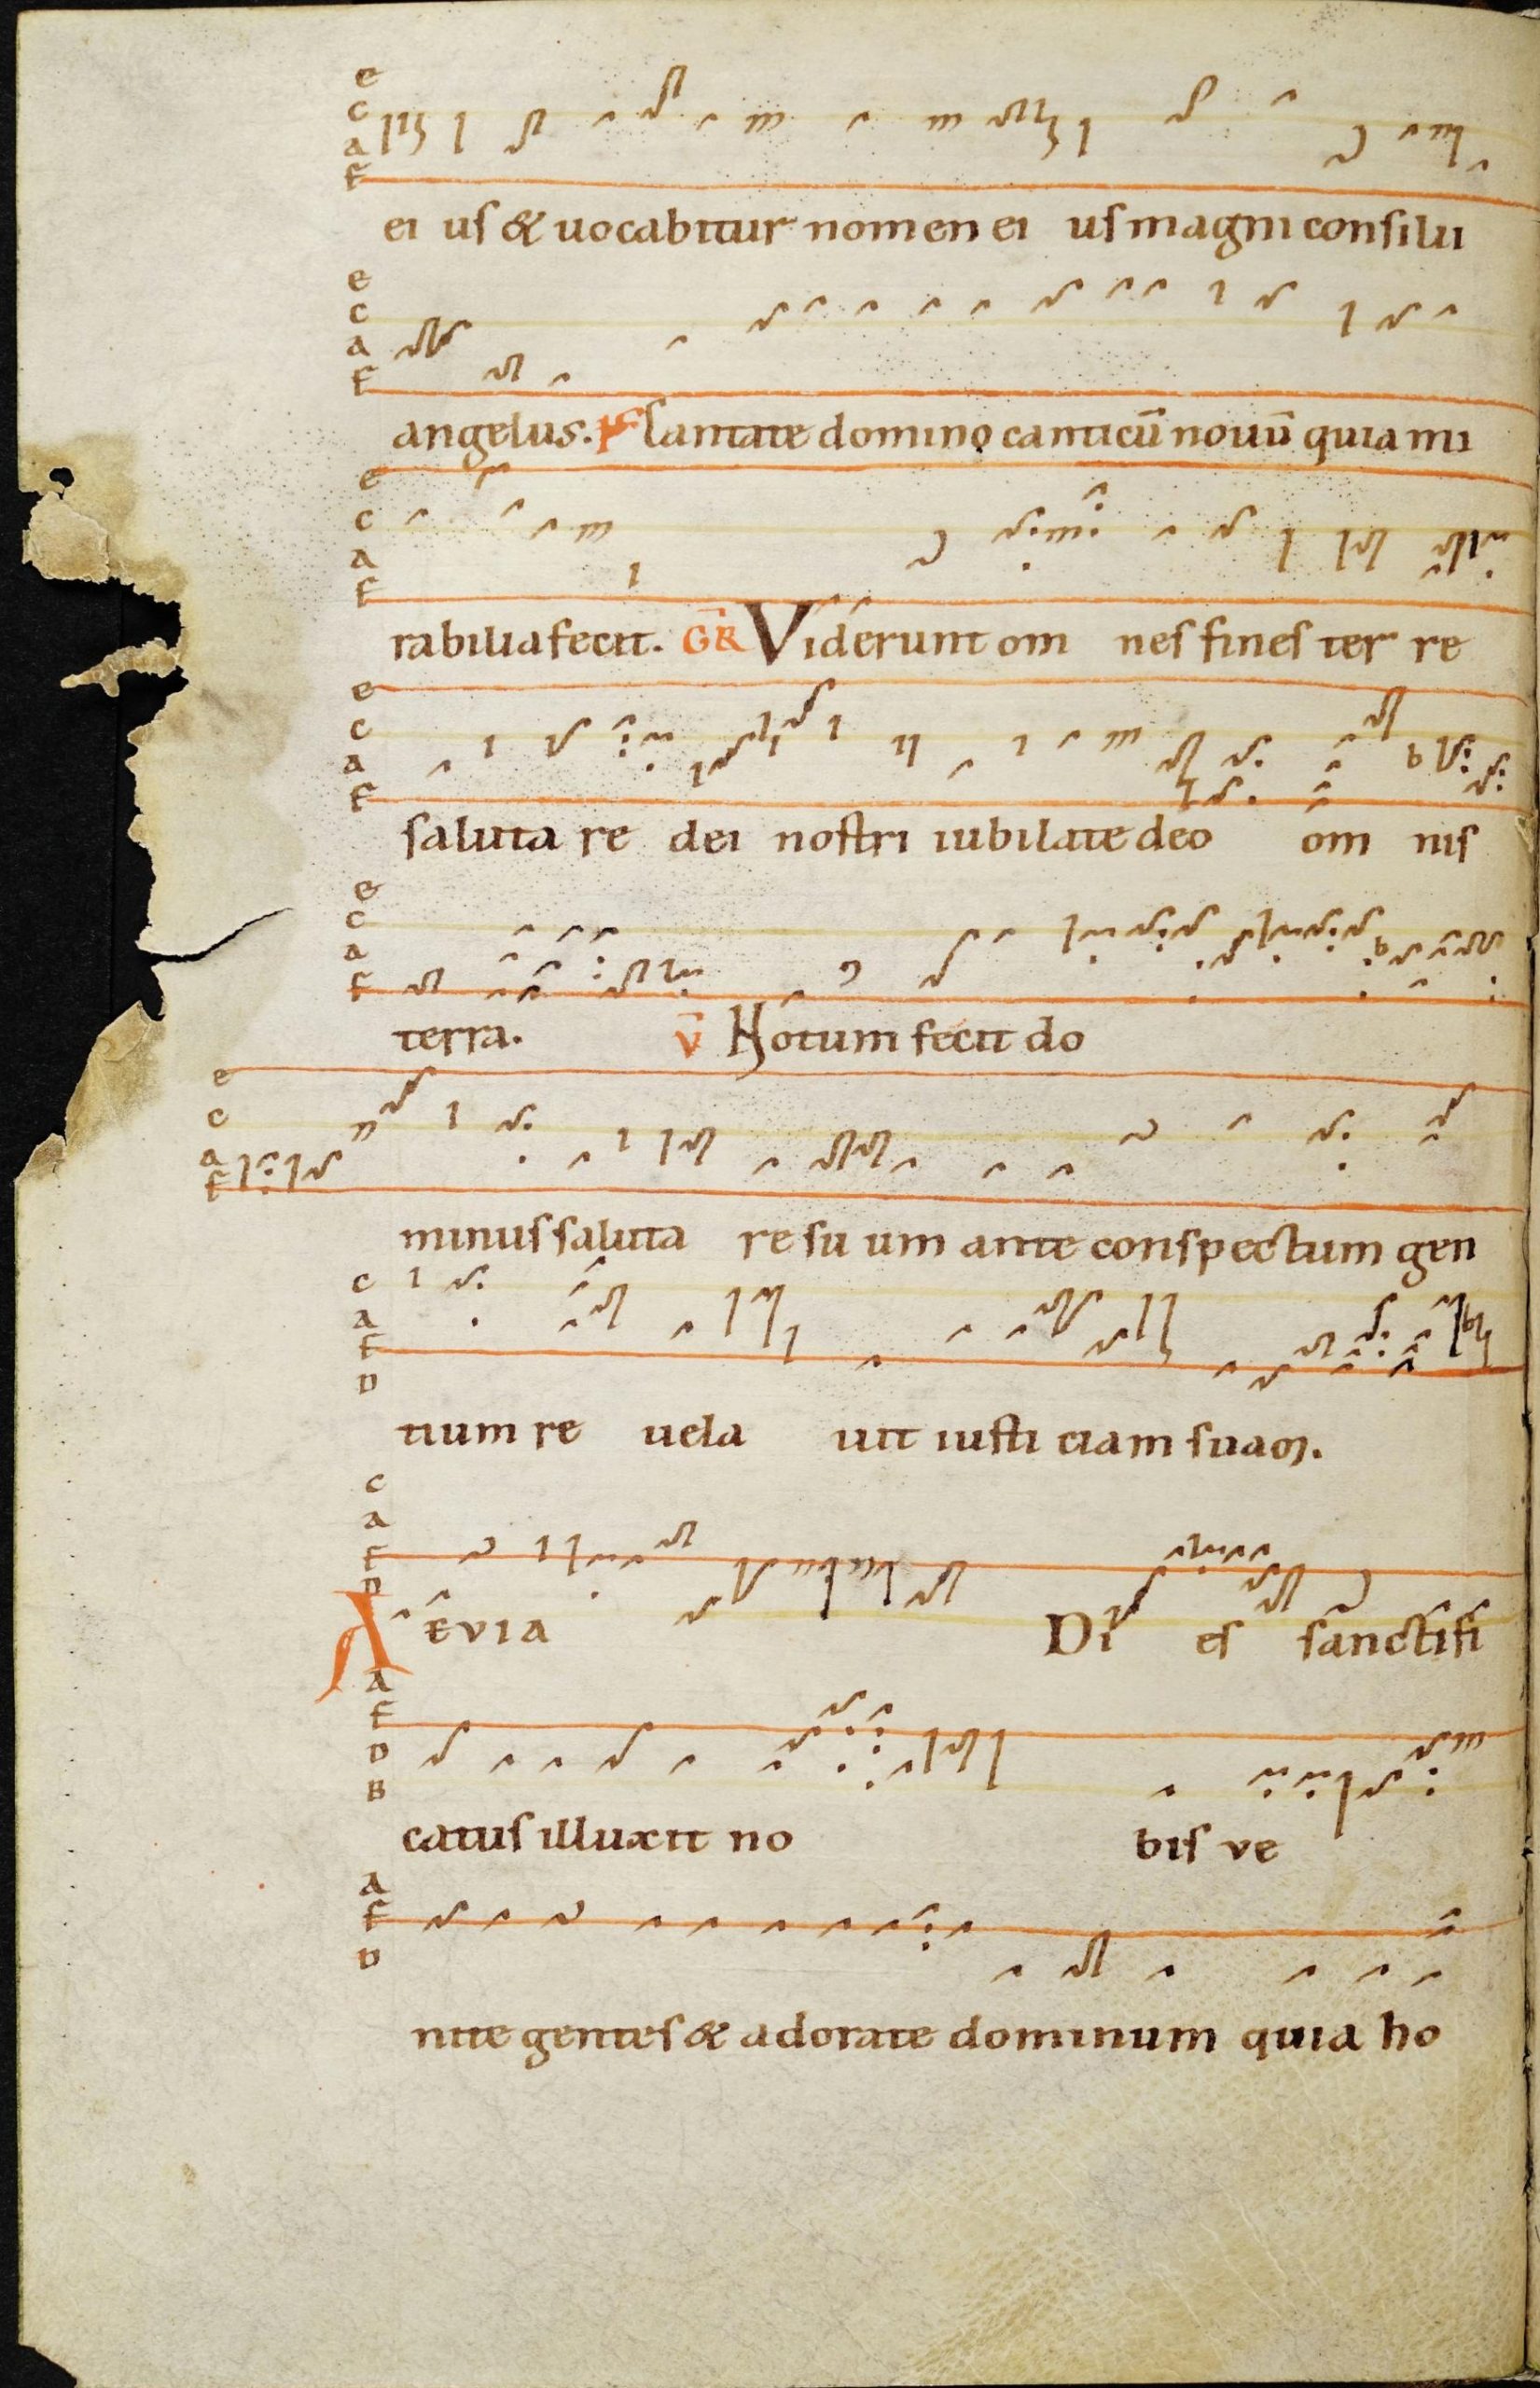 A document showing neumes along four lines representing the pitches F, A, C, and E